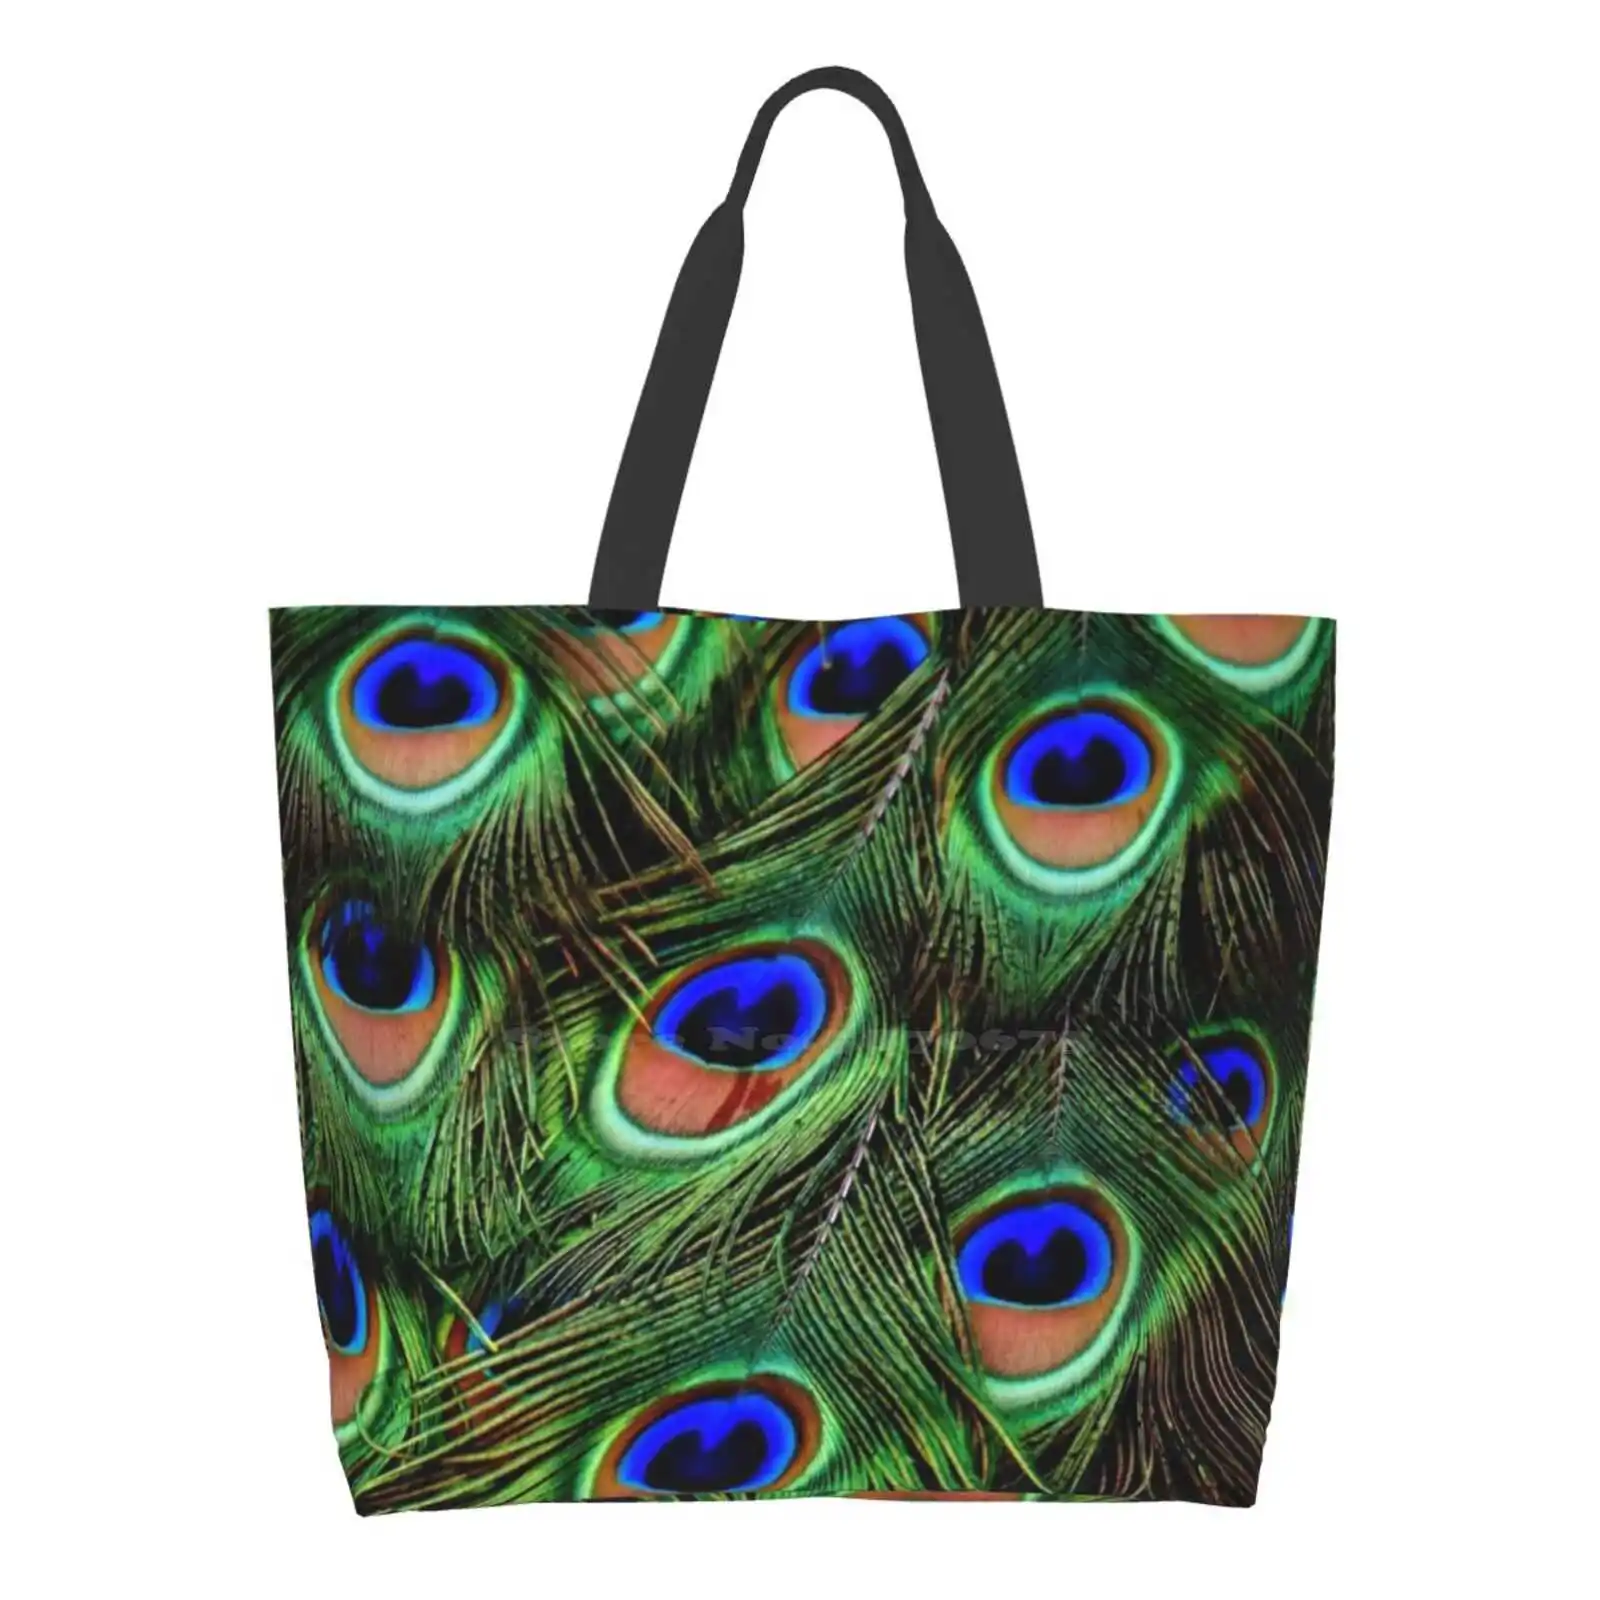 Iridescent, Colorful Peacock Feather Plumage Design Large Size Reusable Foldable Shopping Bag Peacock Feathers Plumage Dazzling